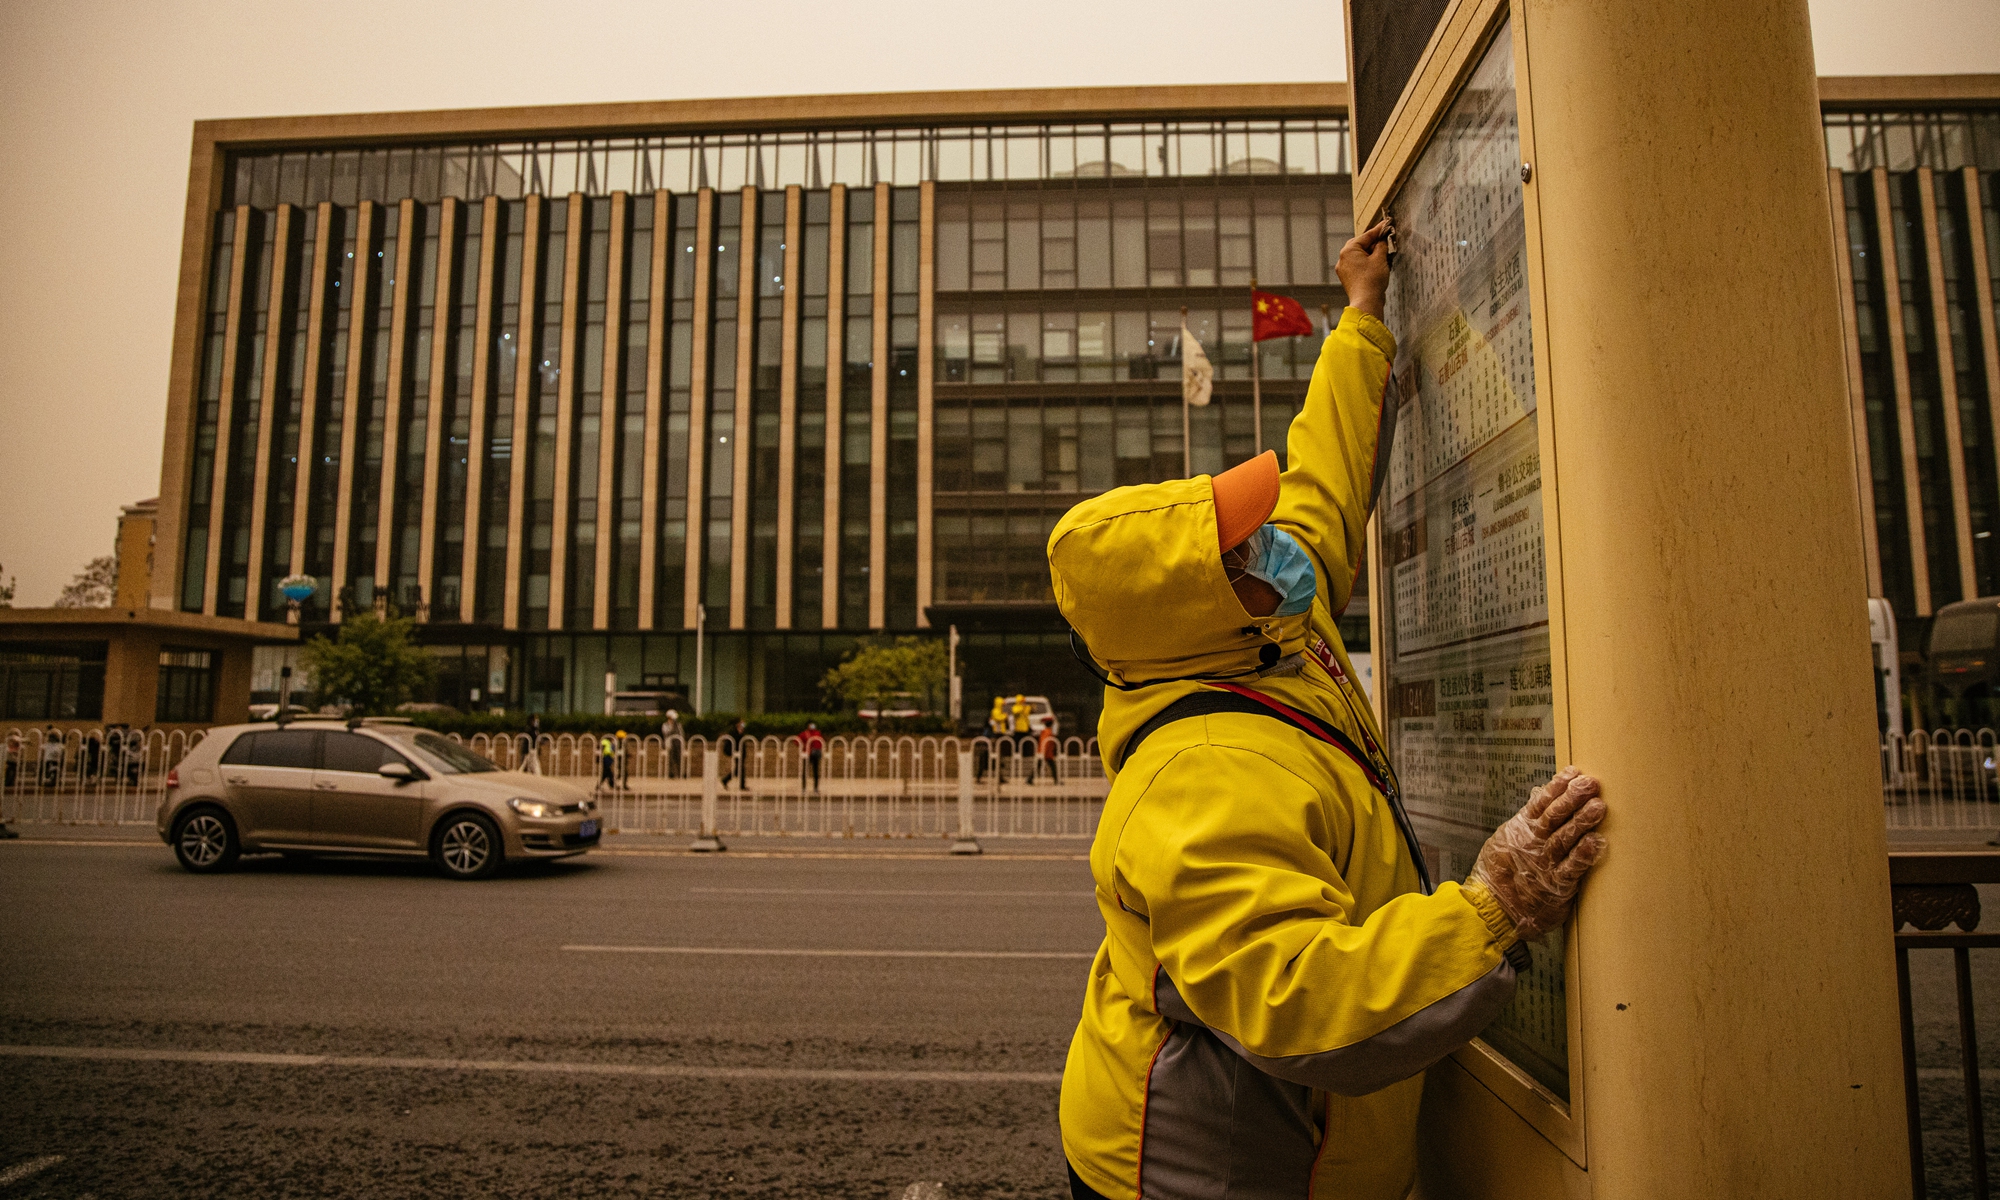 A traffic staff member wipes a bus stop billboard in the wind, accompanied by rain and mud in Shijingshan district, Beijing on Thursday. Beijing experienced a new wave of sandstorms with muddy rainfall on Thursday afternoon, triggering a blue alert for sandstorms. Photo: Li Hao/GT